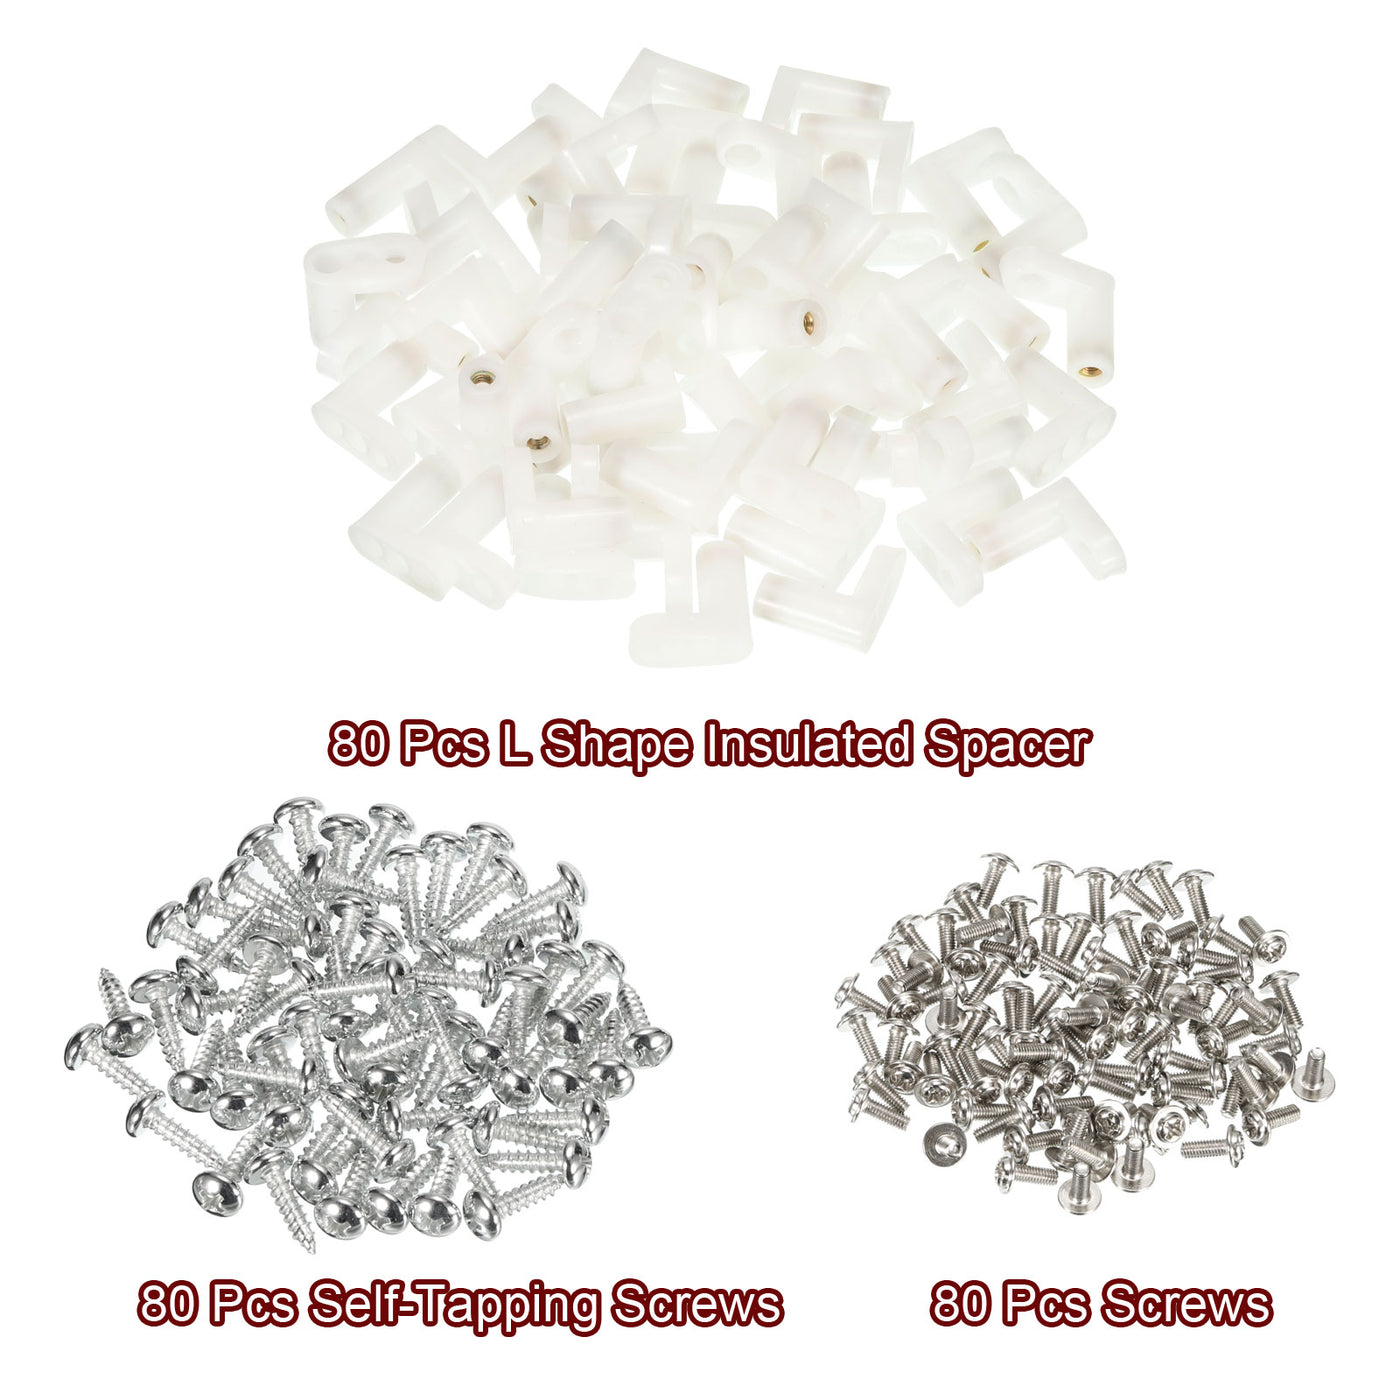 uxcell Uxcell 80 Pcs Circuit Board L Shape Insulated PCB Spacer 20mm Standoffs Mounting Feet Supporting Height with Screws White